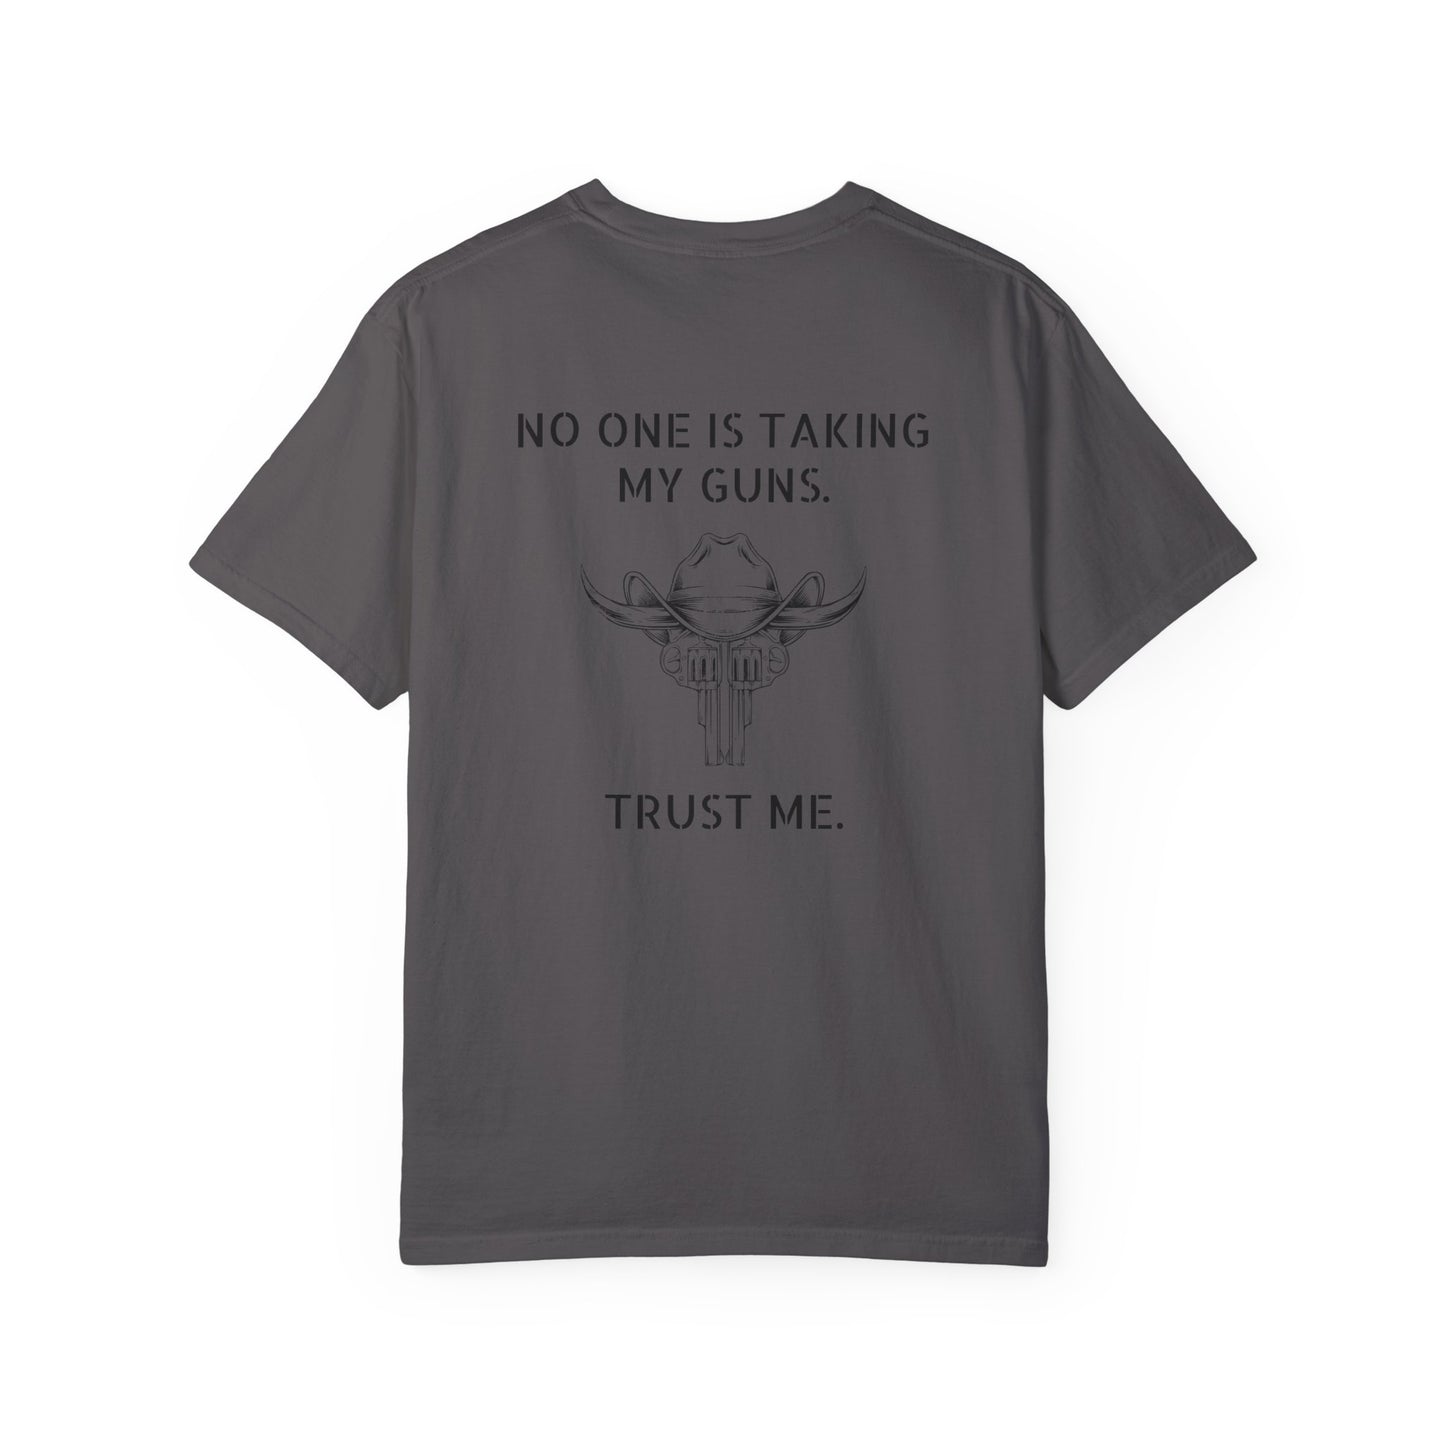 "NO ONE IS TAKING MY GUNS" Tee